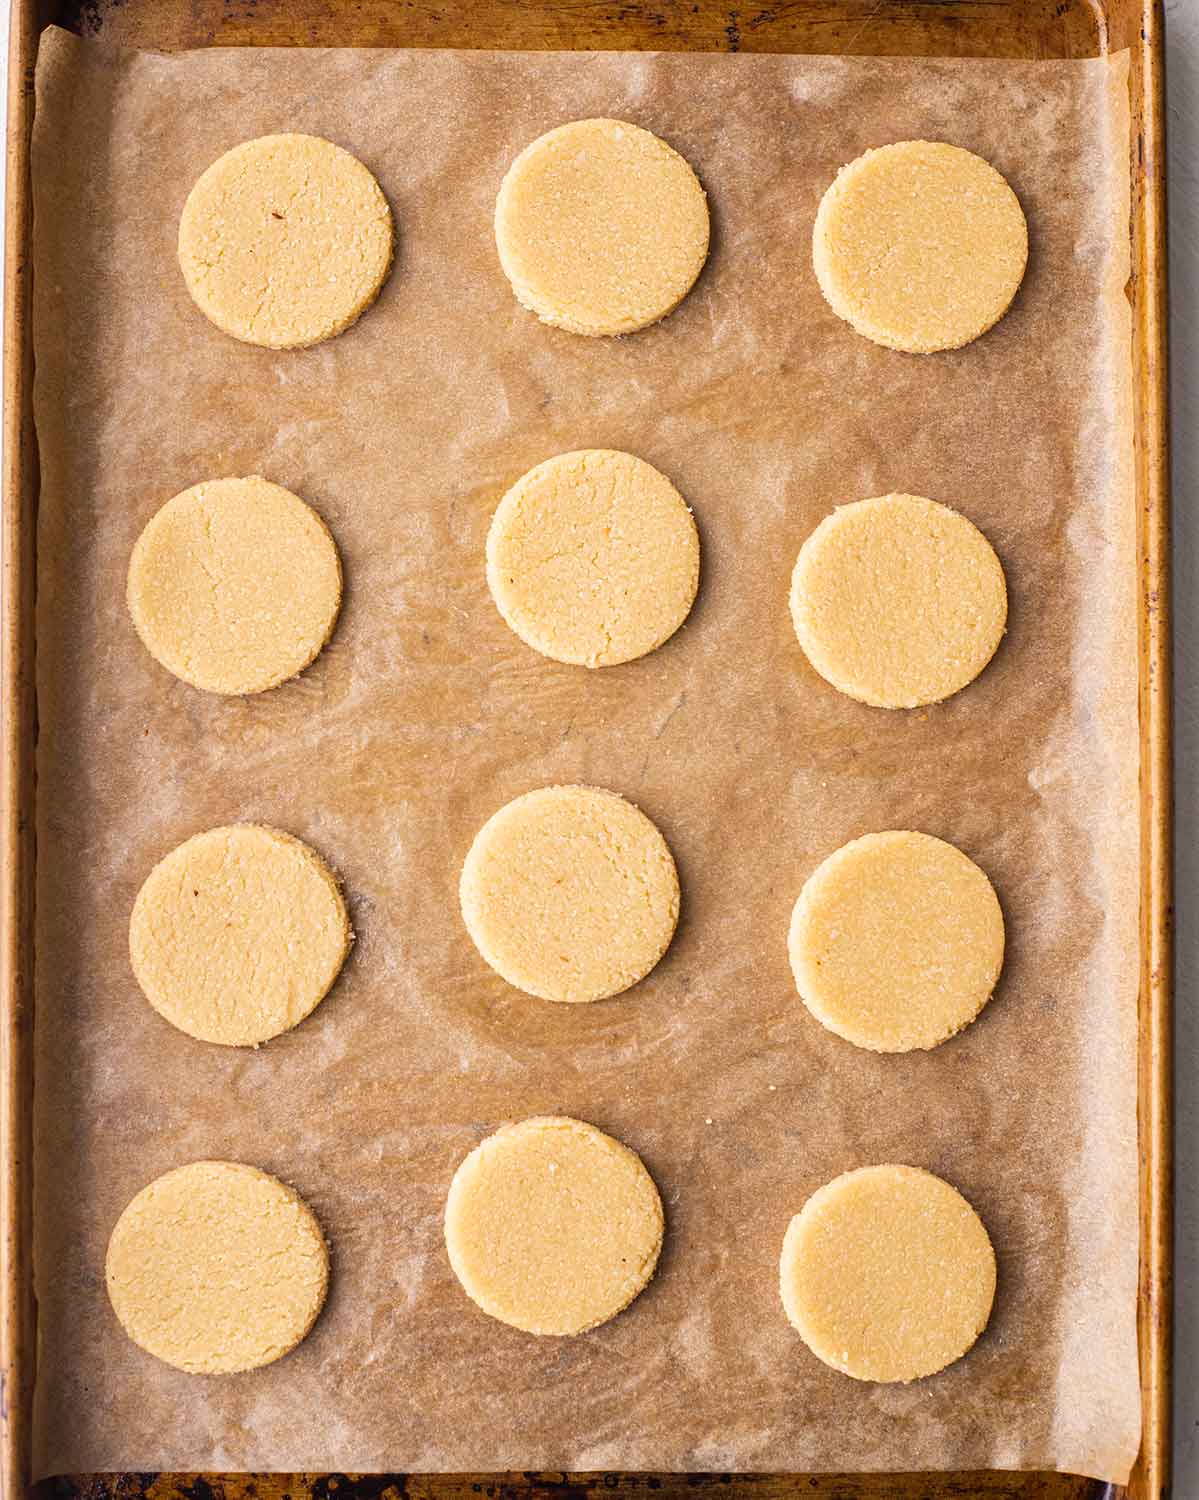 Lined baking tray of 12 unbaked round vegan gluten free shortbread.